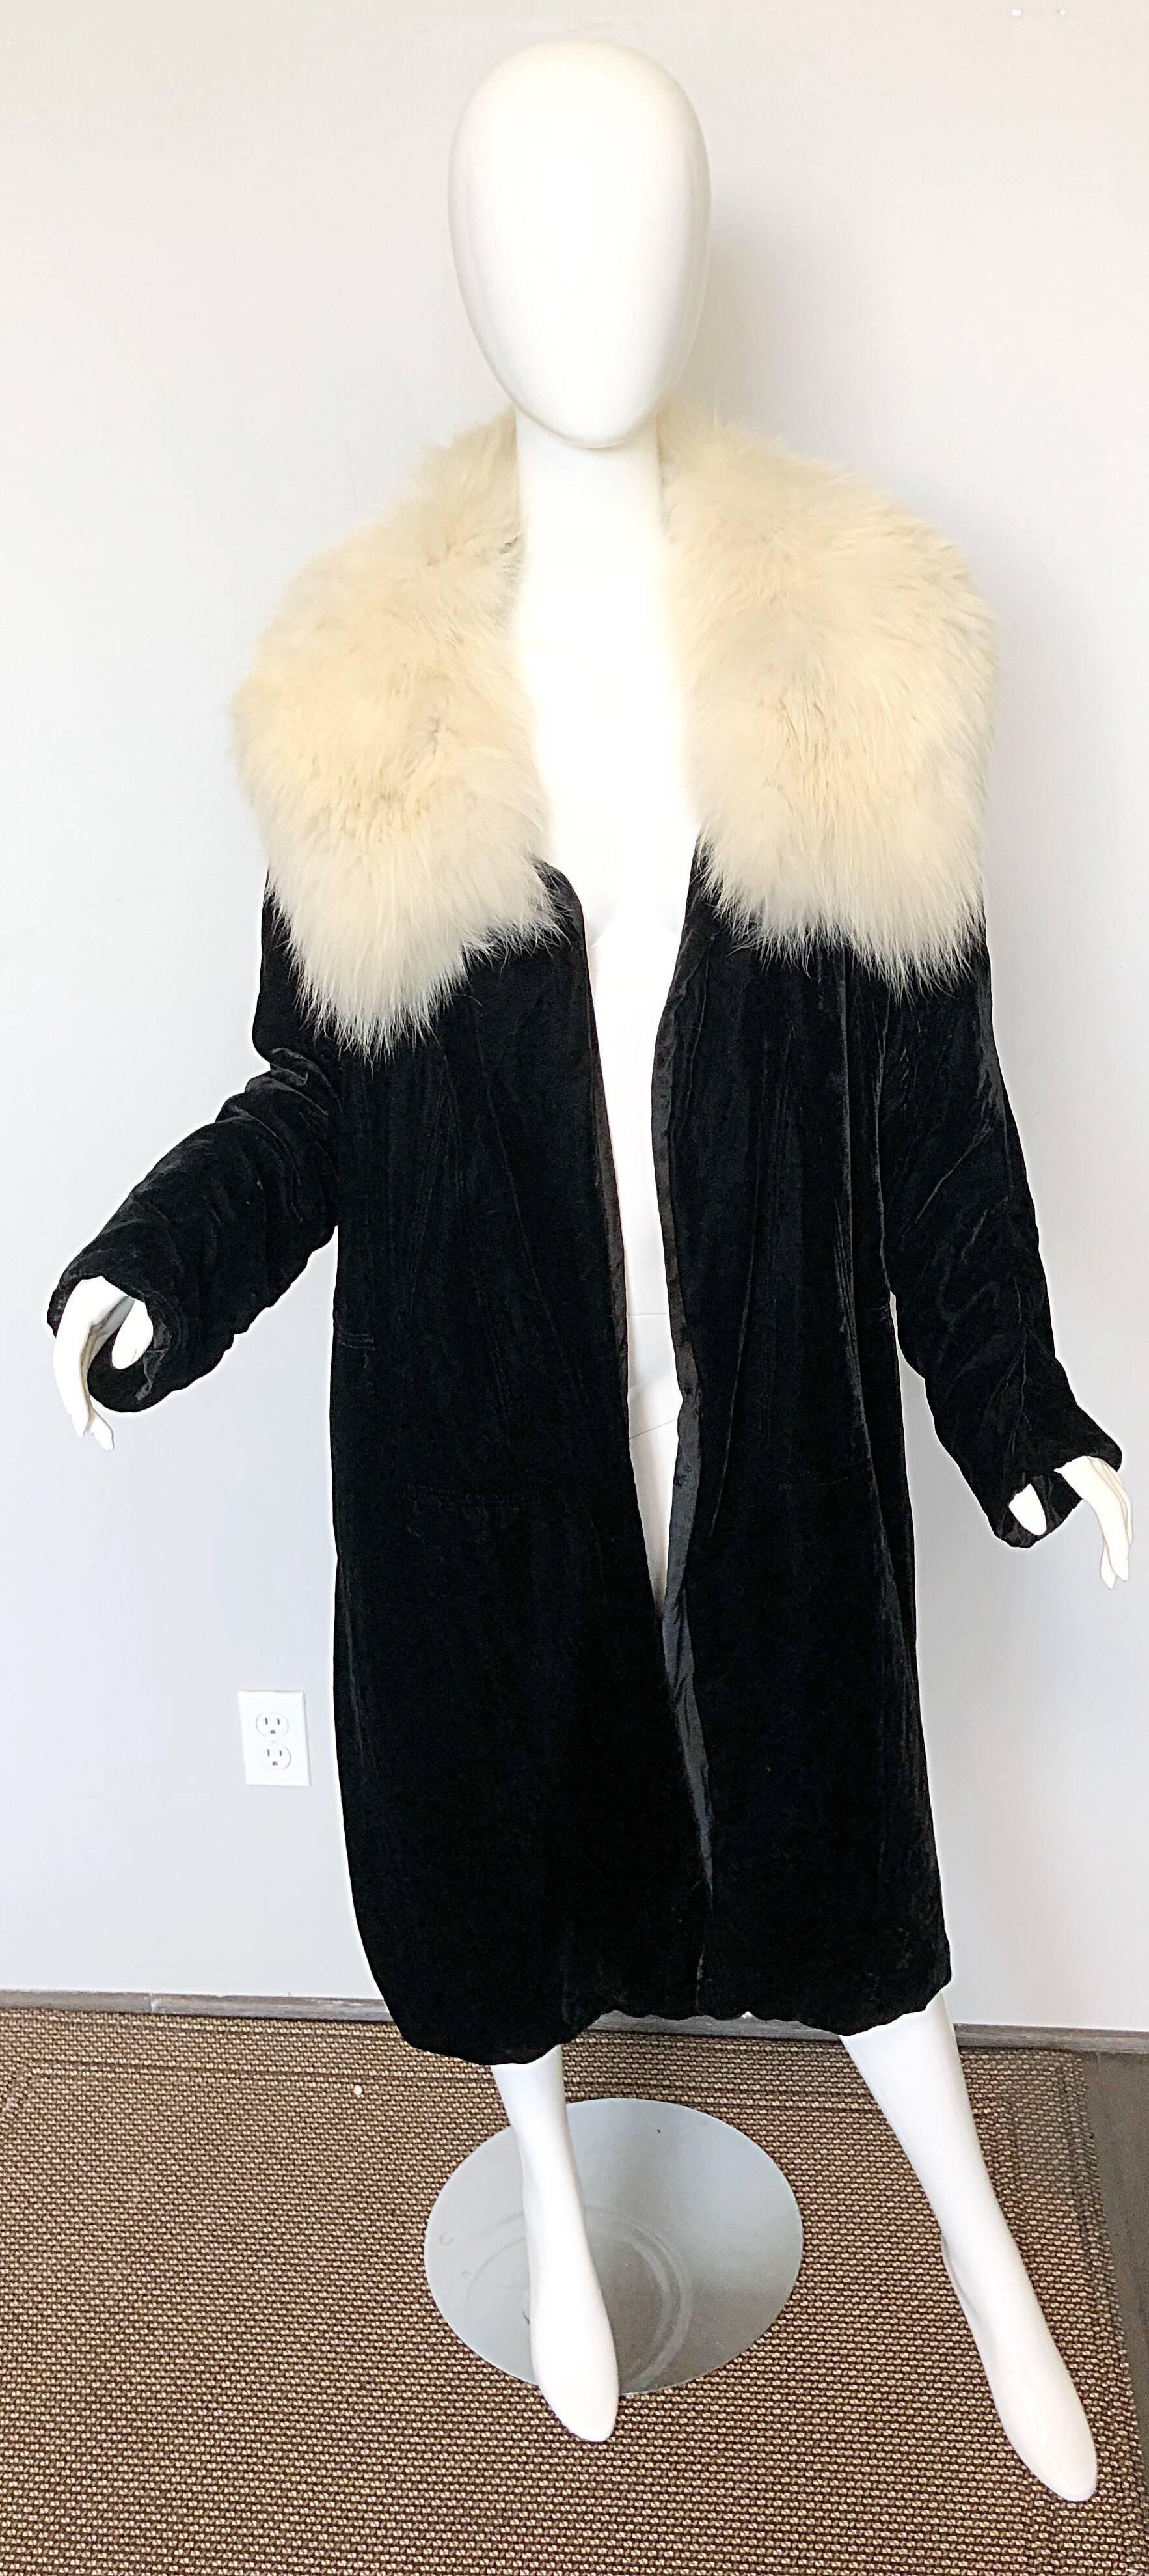 Stunning and rare 1930s HATTIE CARNEGIE for I MAGNIN black silk velvet opera coat with dramatic white fox fur oversized collar! Features the softest most luxurious silk velvet and high grade white fox fur. Couture quality, with most of the